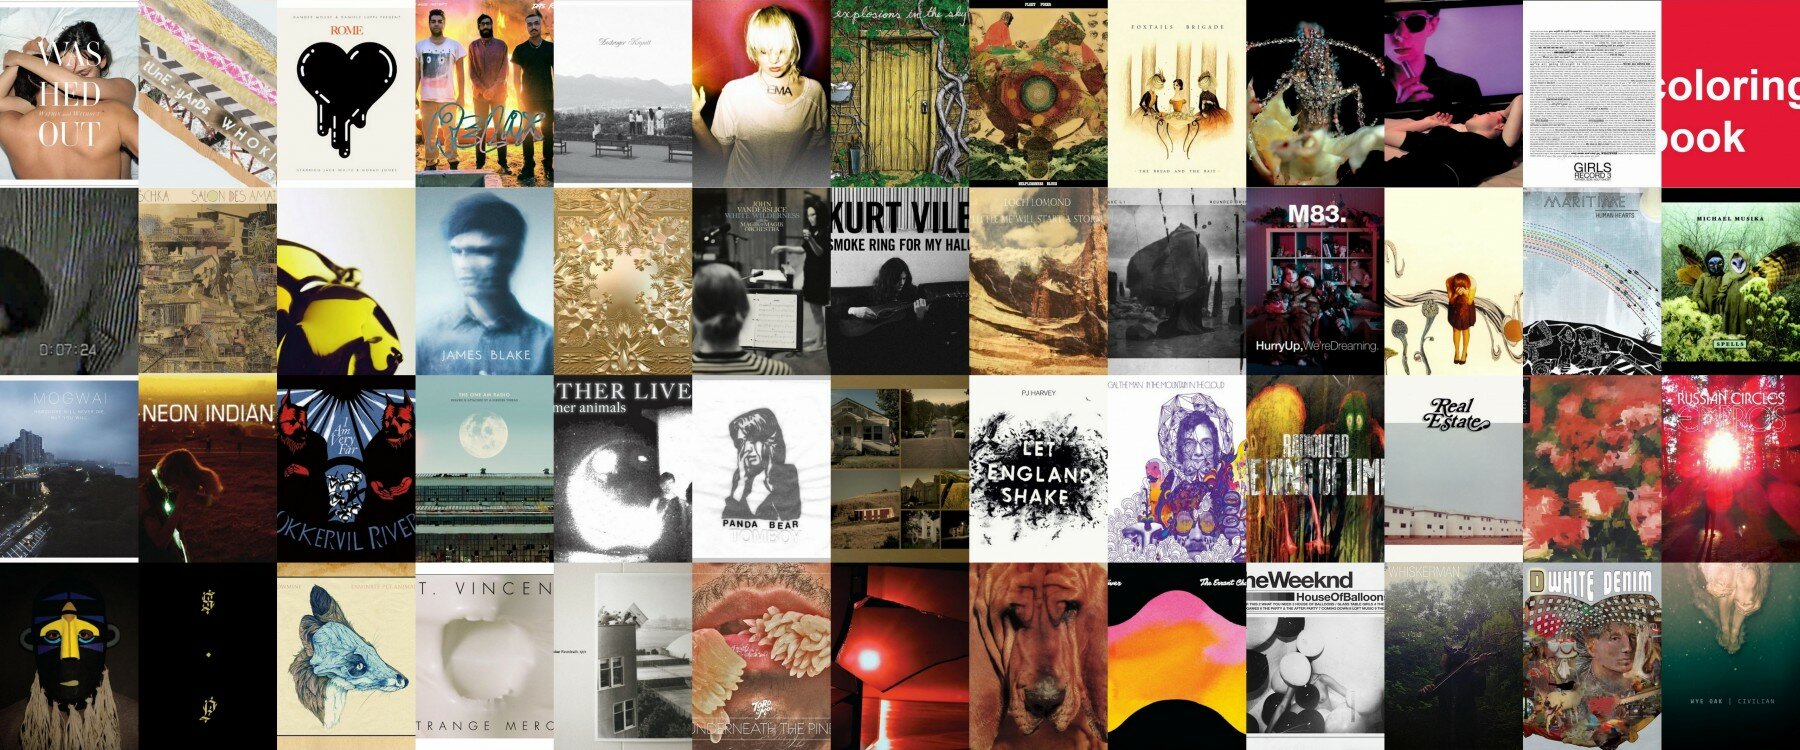 albums of 2011